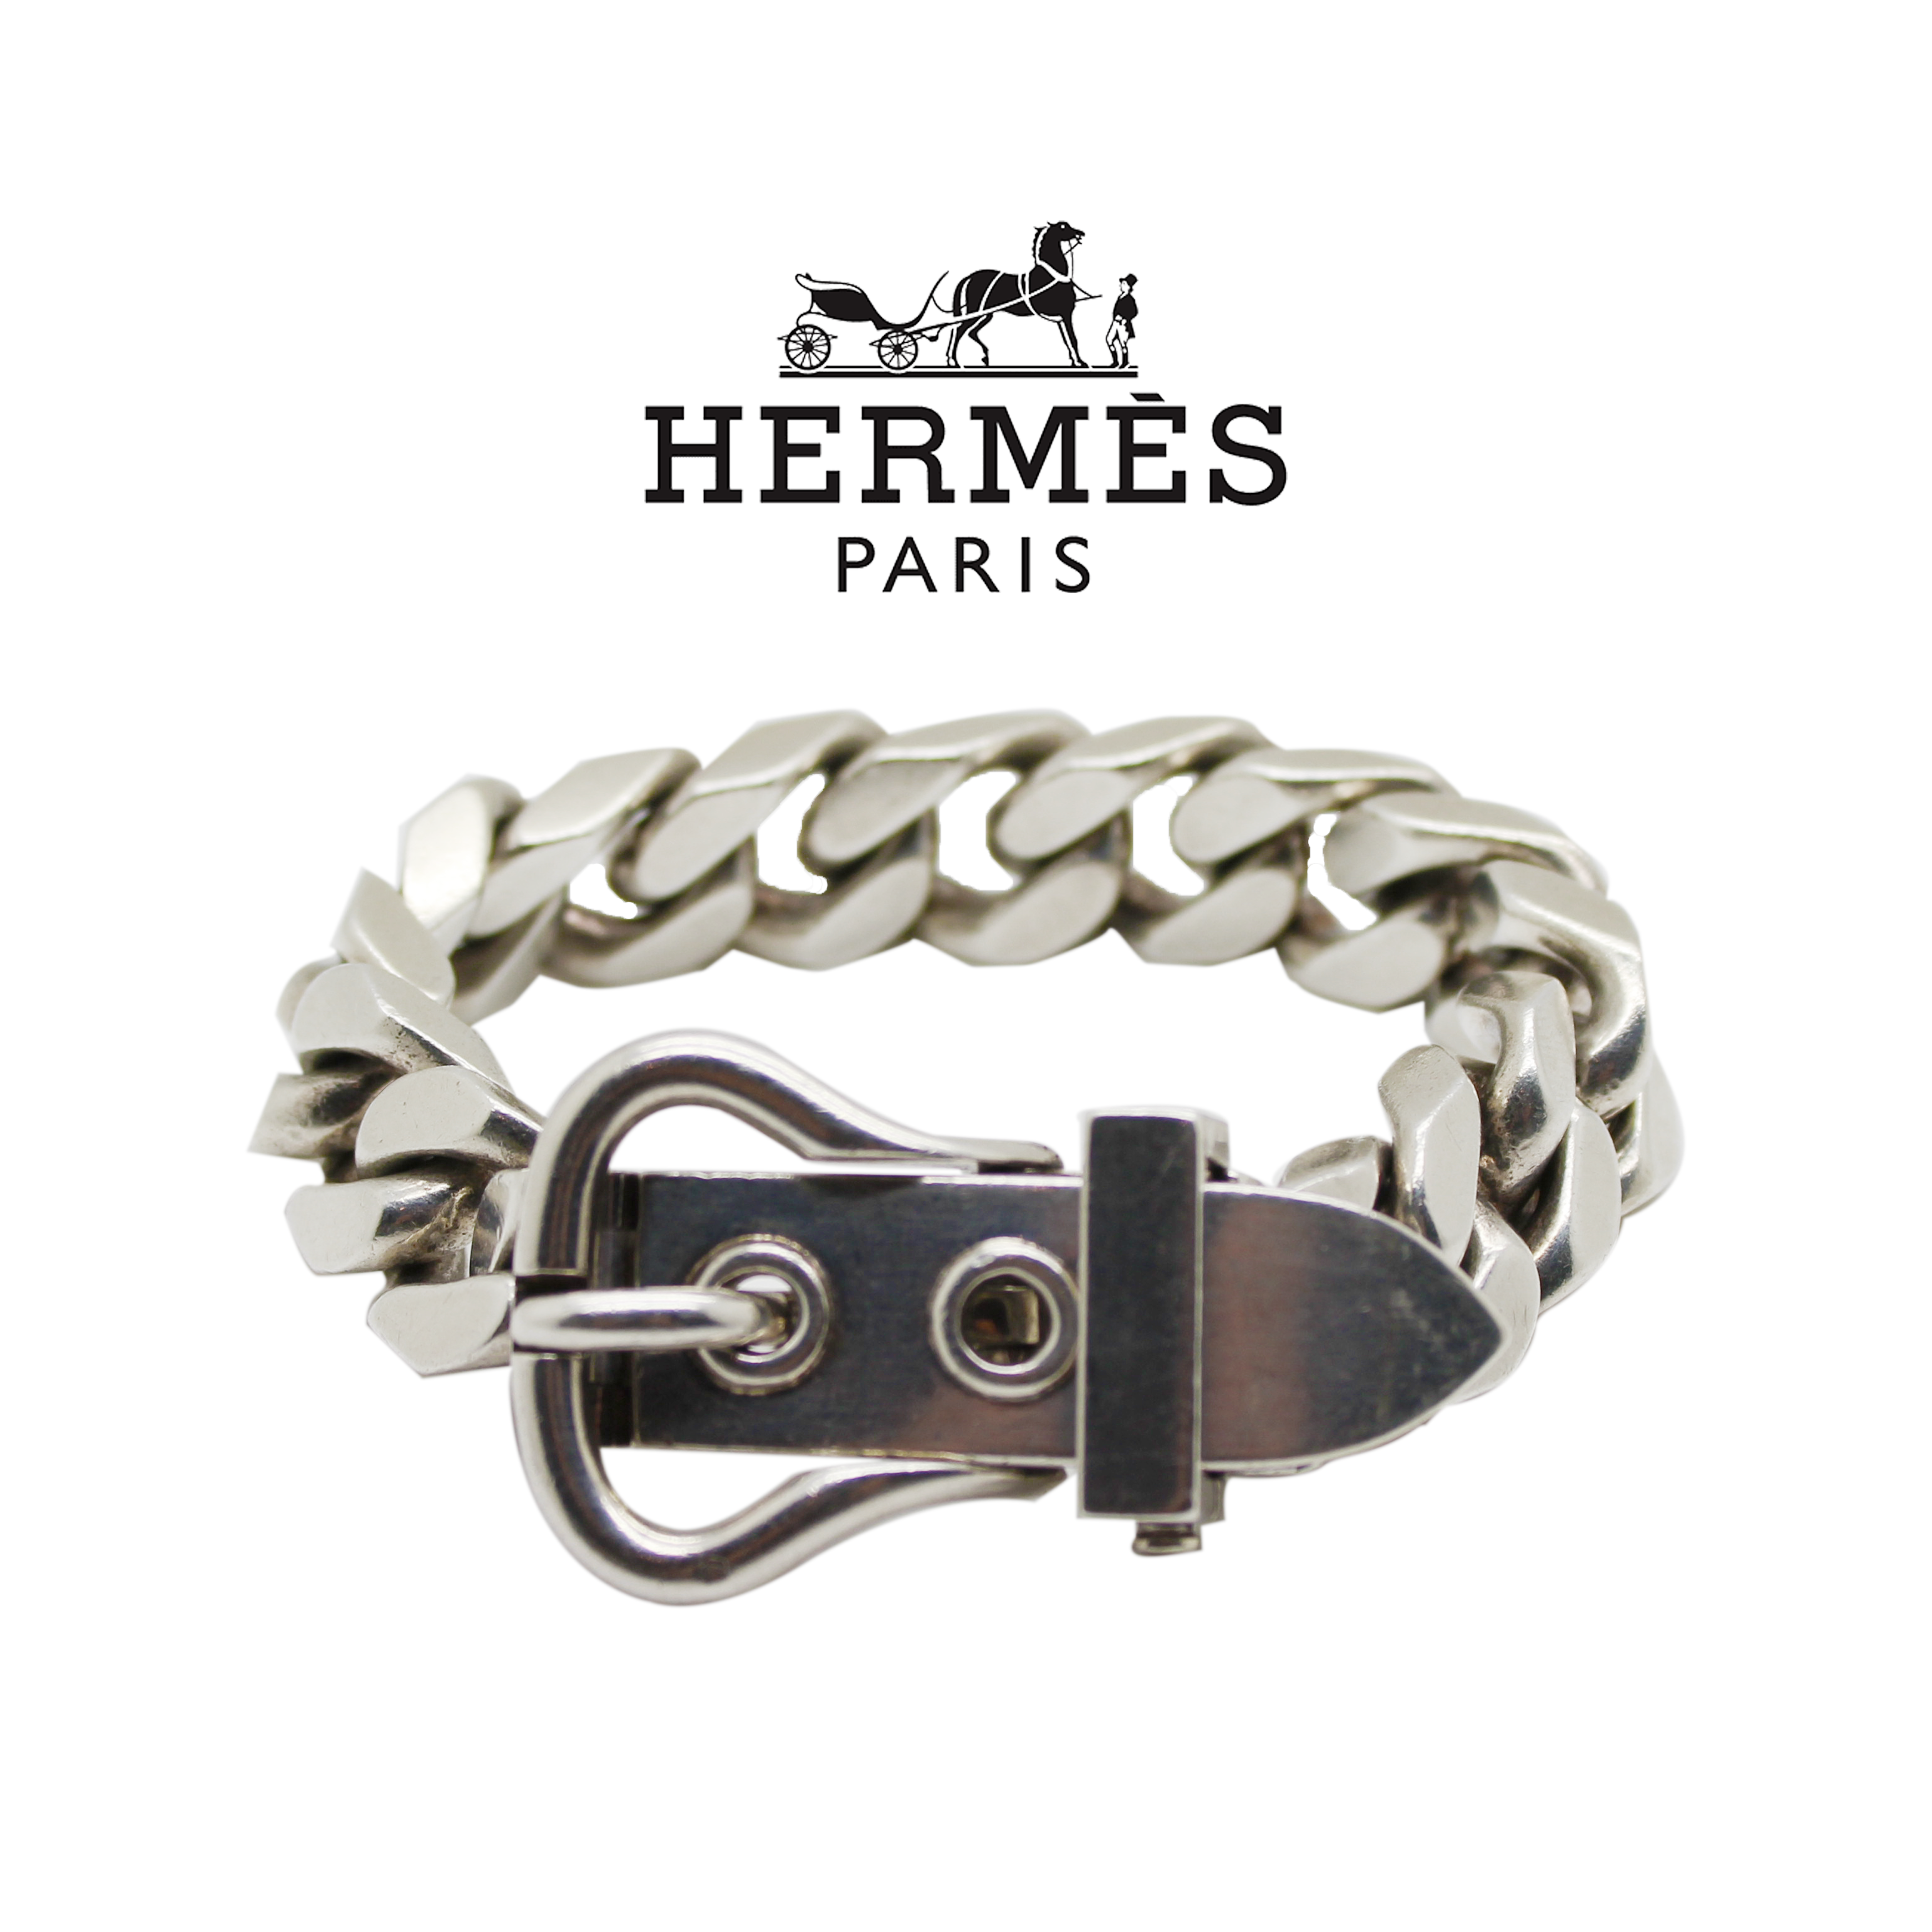 Vintage Hermes Paris Silber Armband, Modell "Boucle Sellier"